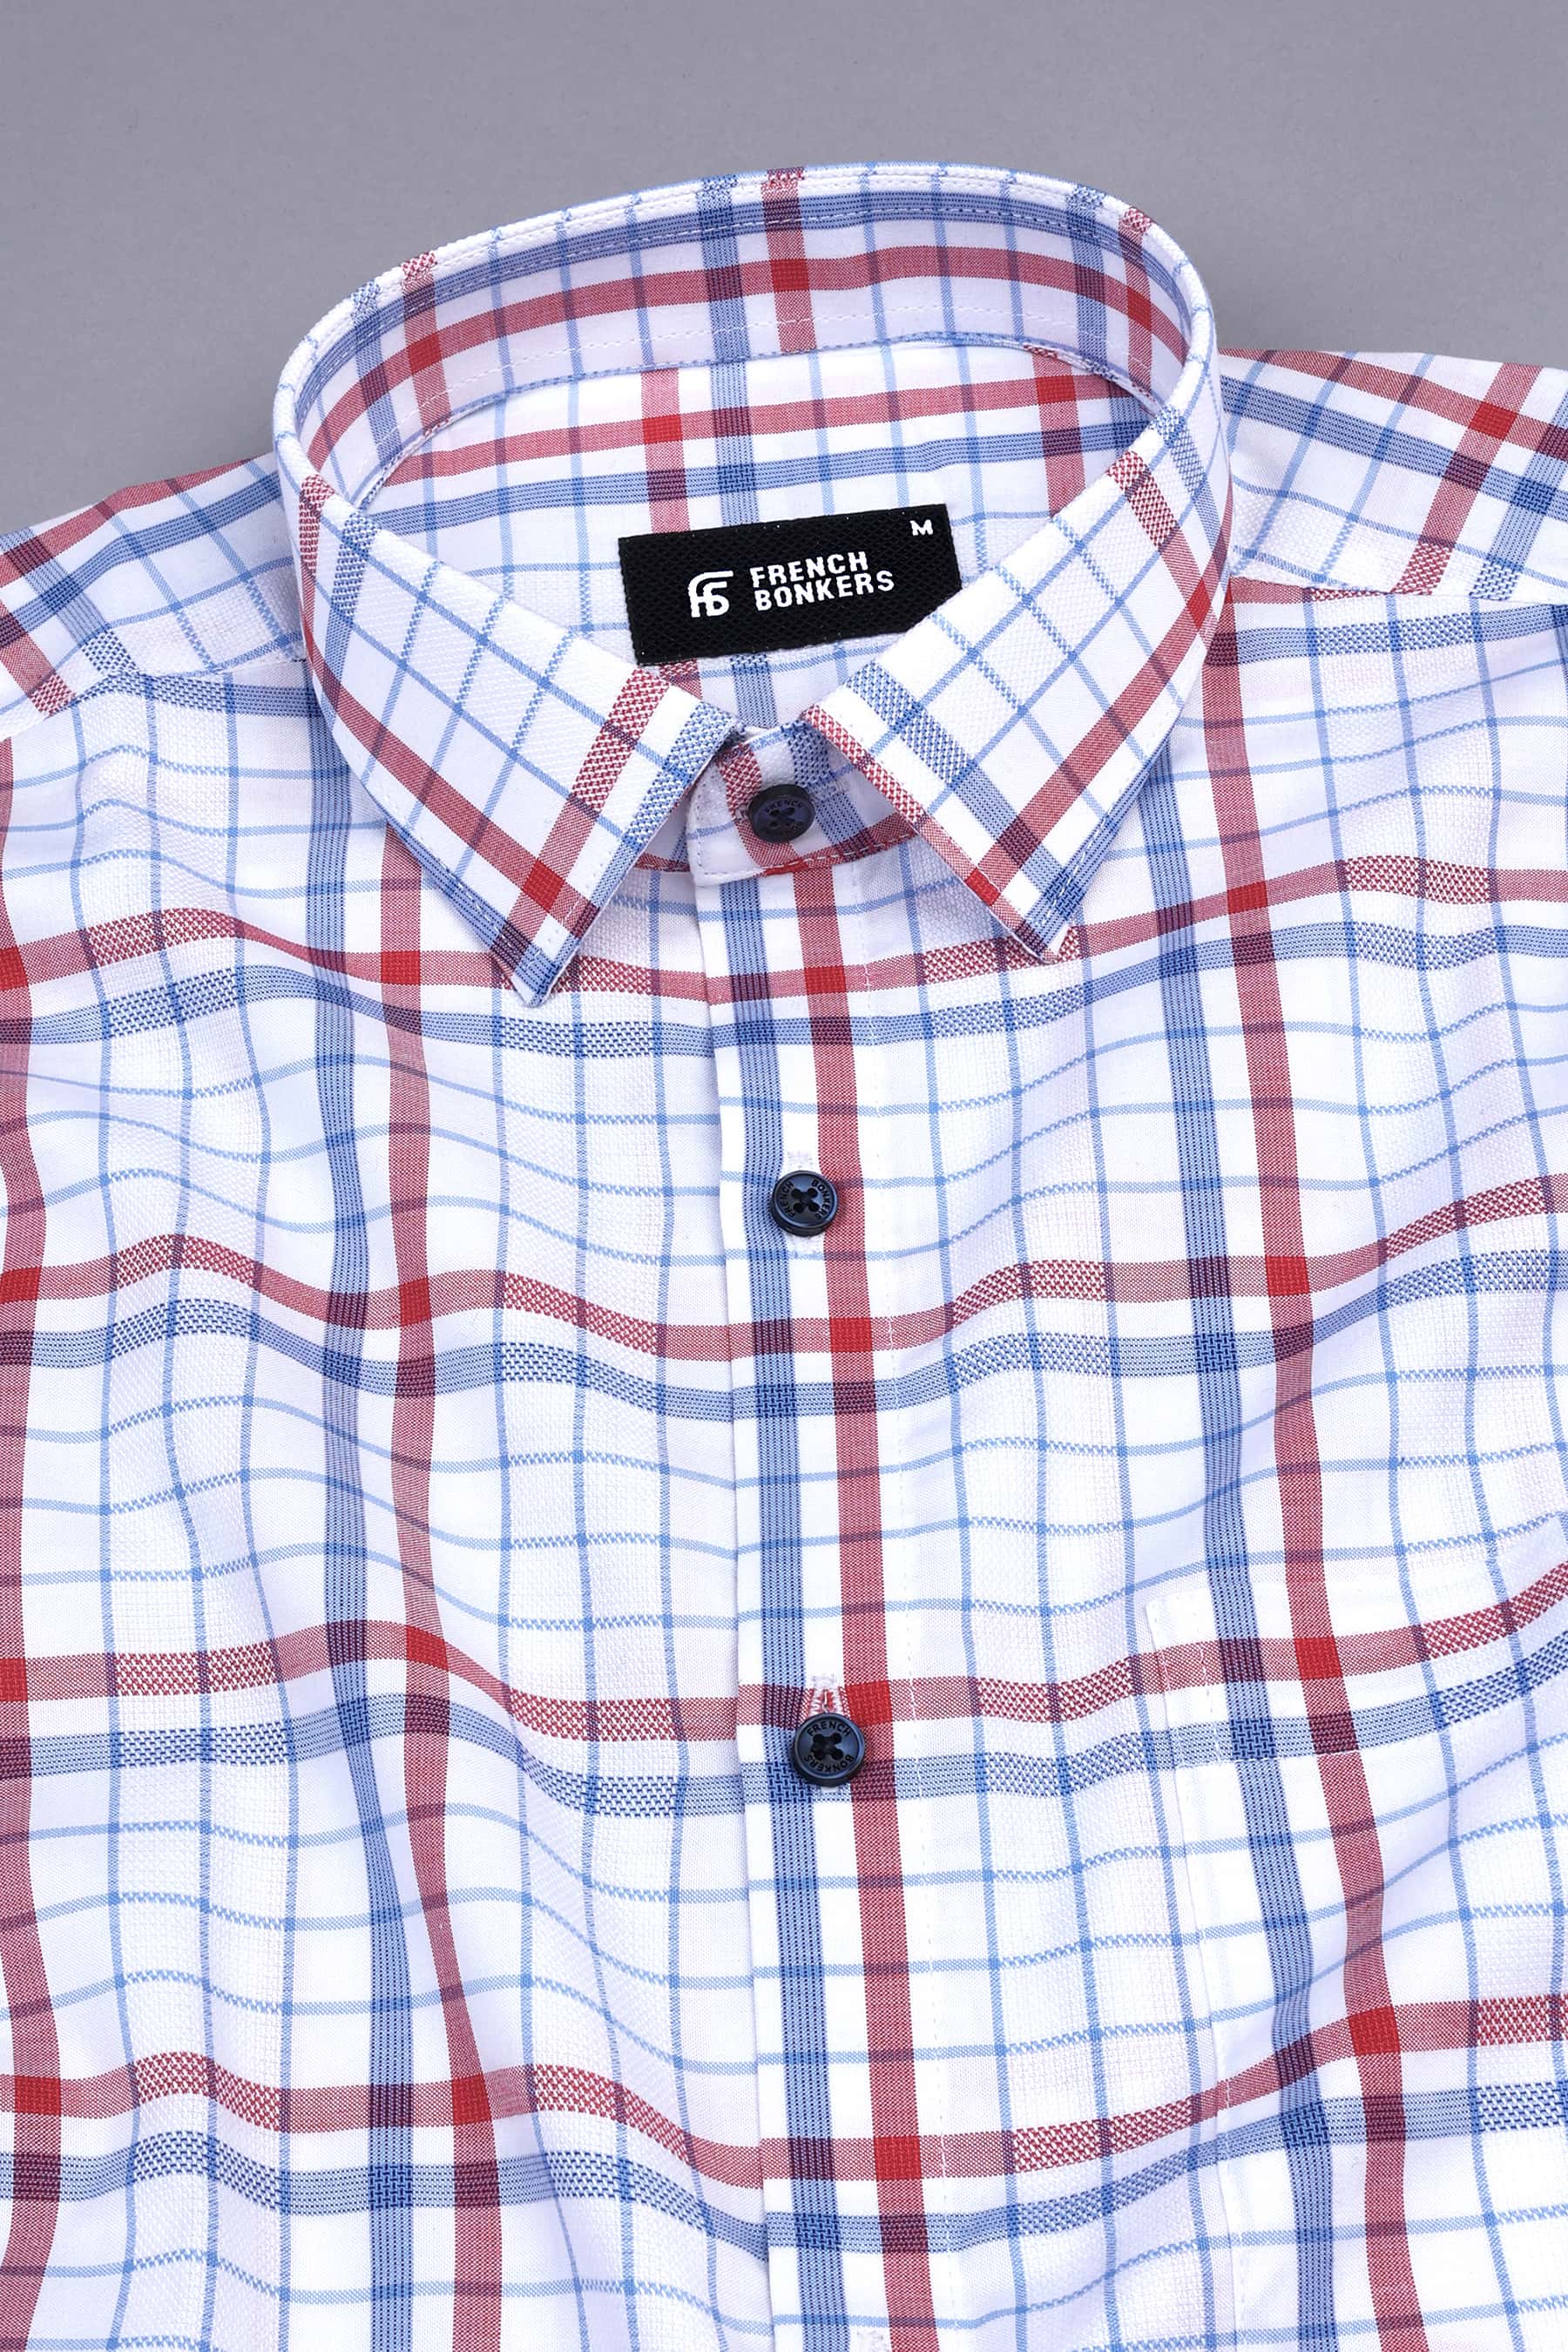 Unique white with red and blue line cotton check shirt